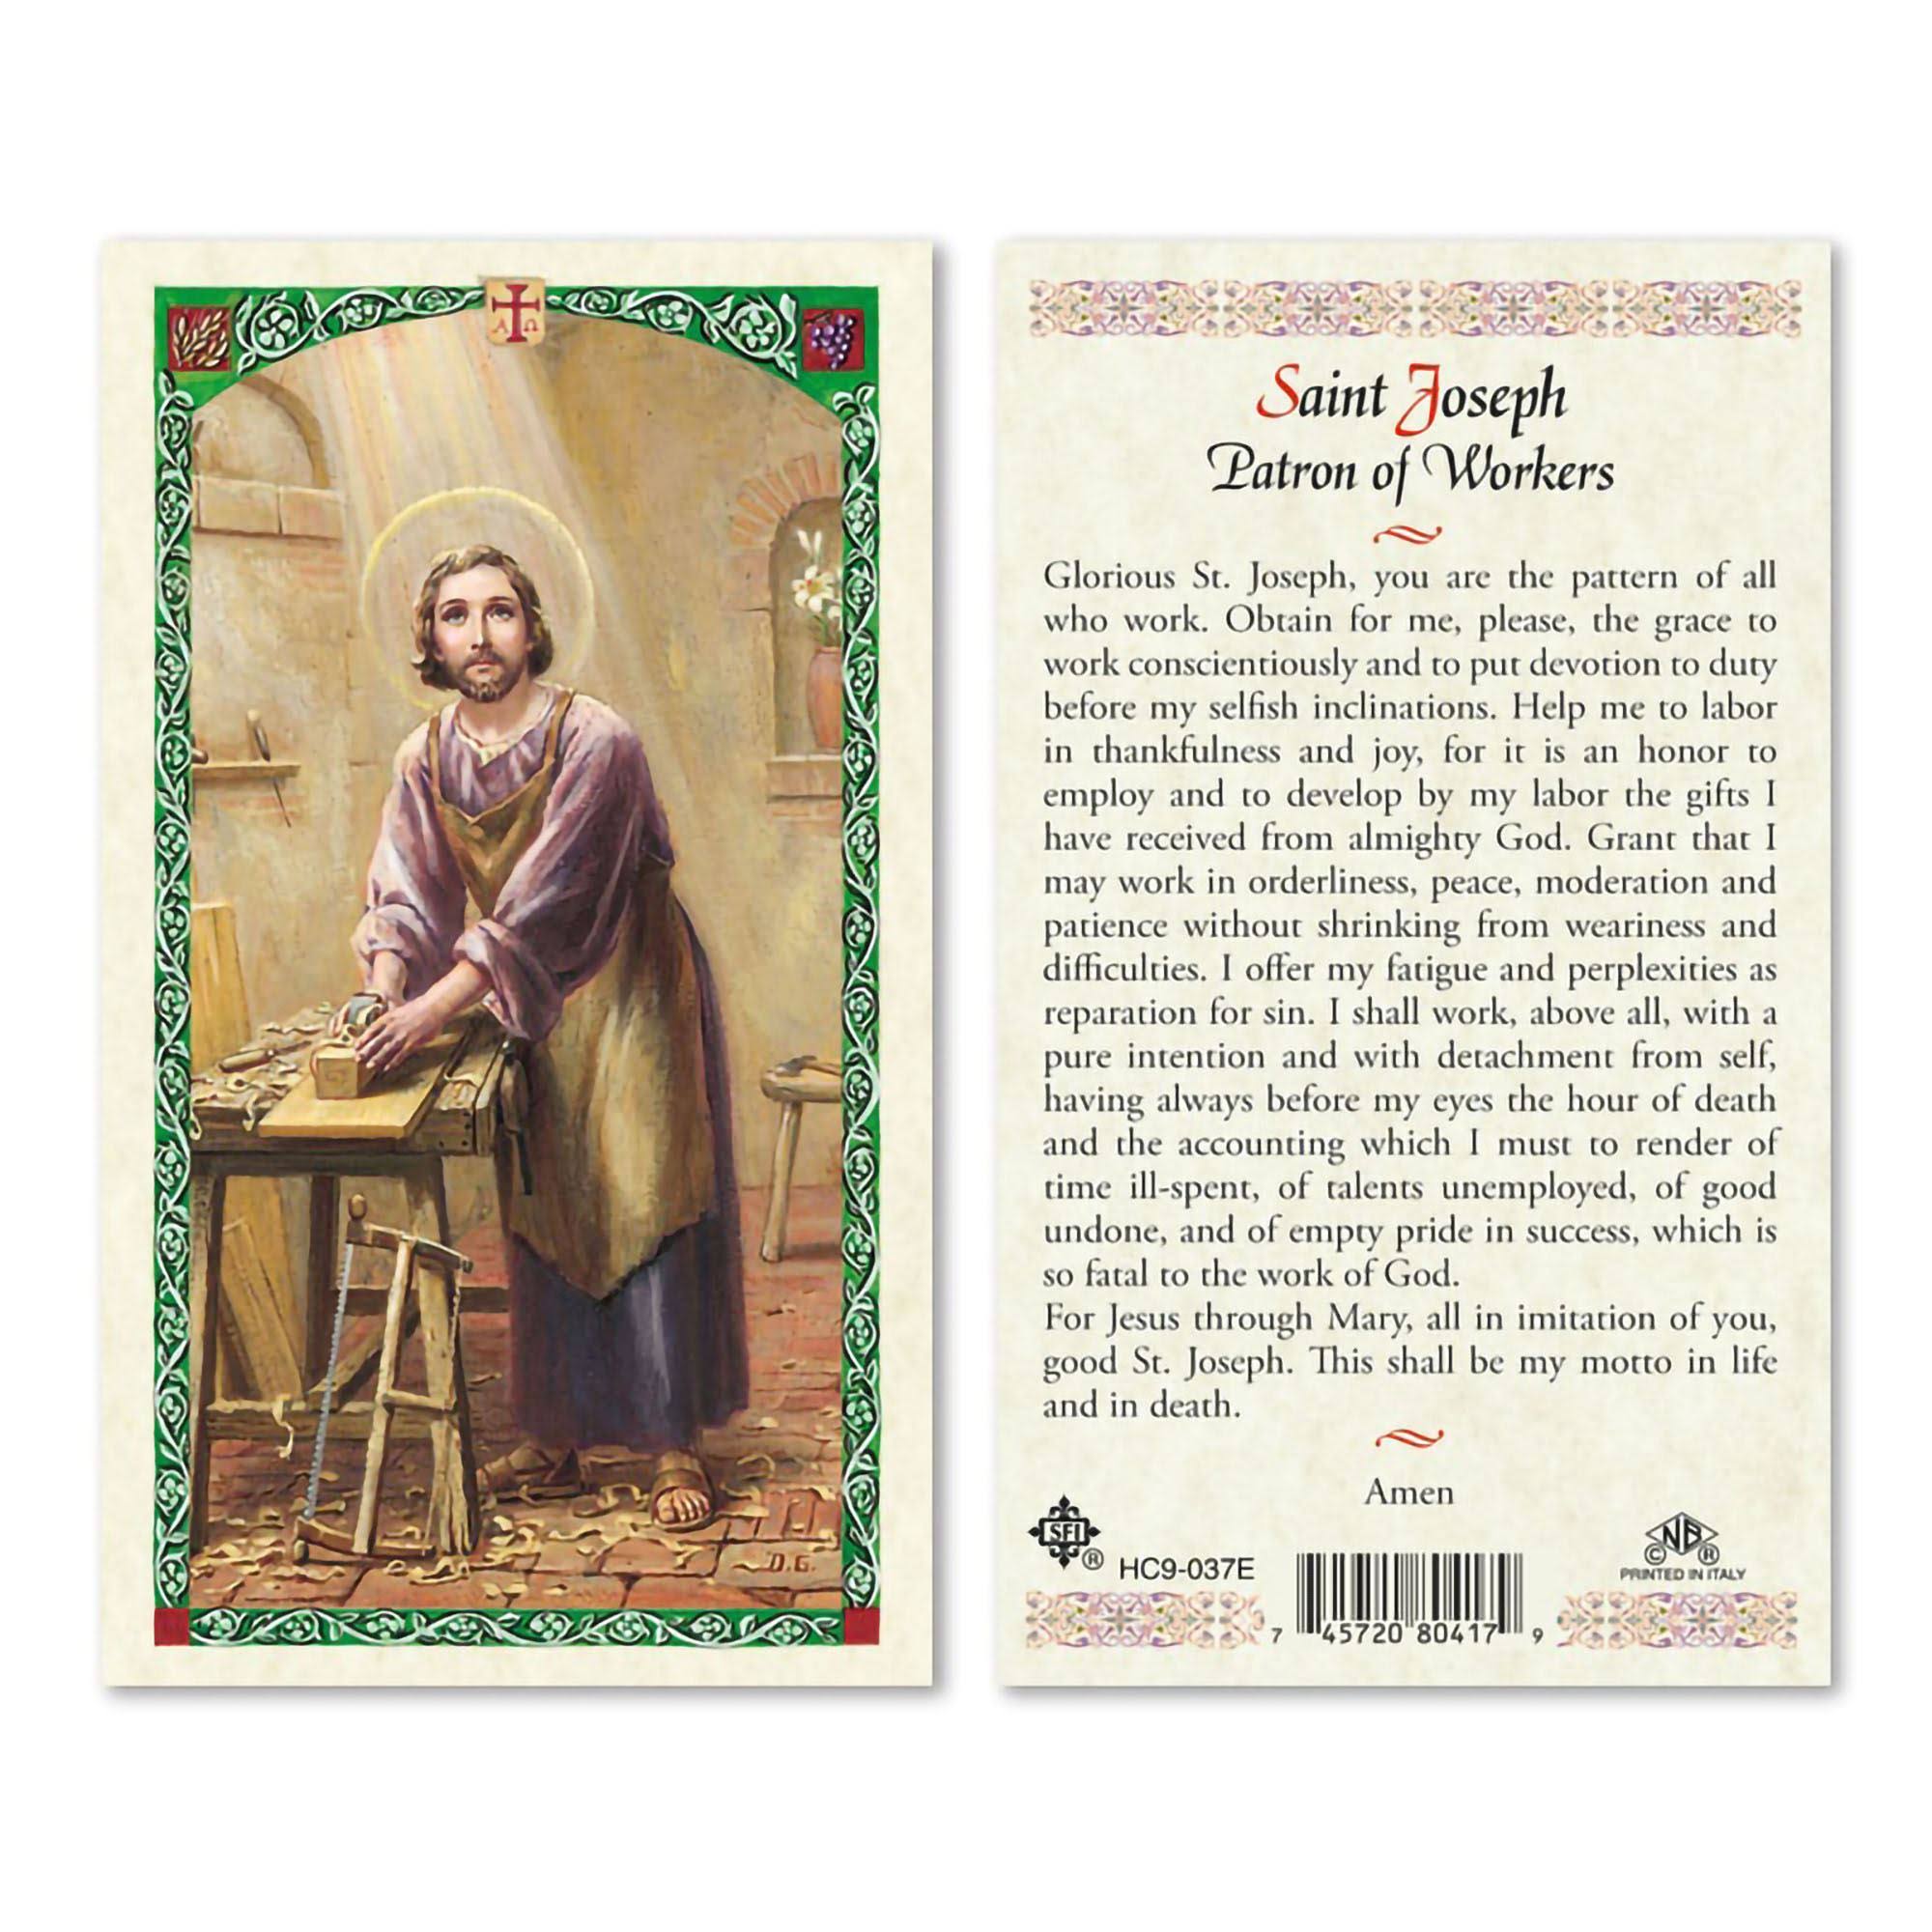 Saint Joseph, Patron of Workers Laminated Prayer Card from San Francis Imports | Discount Catholic Products